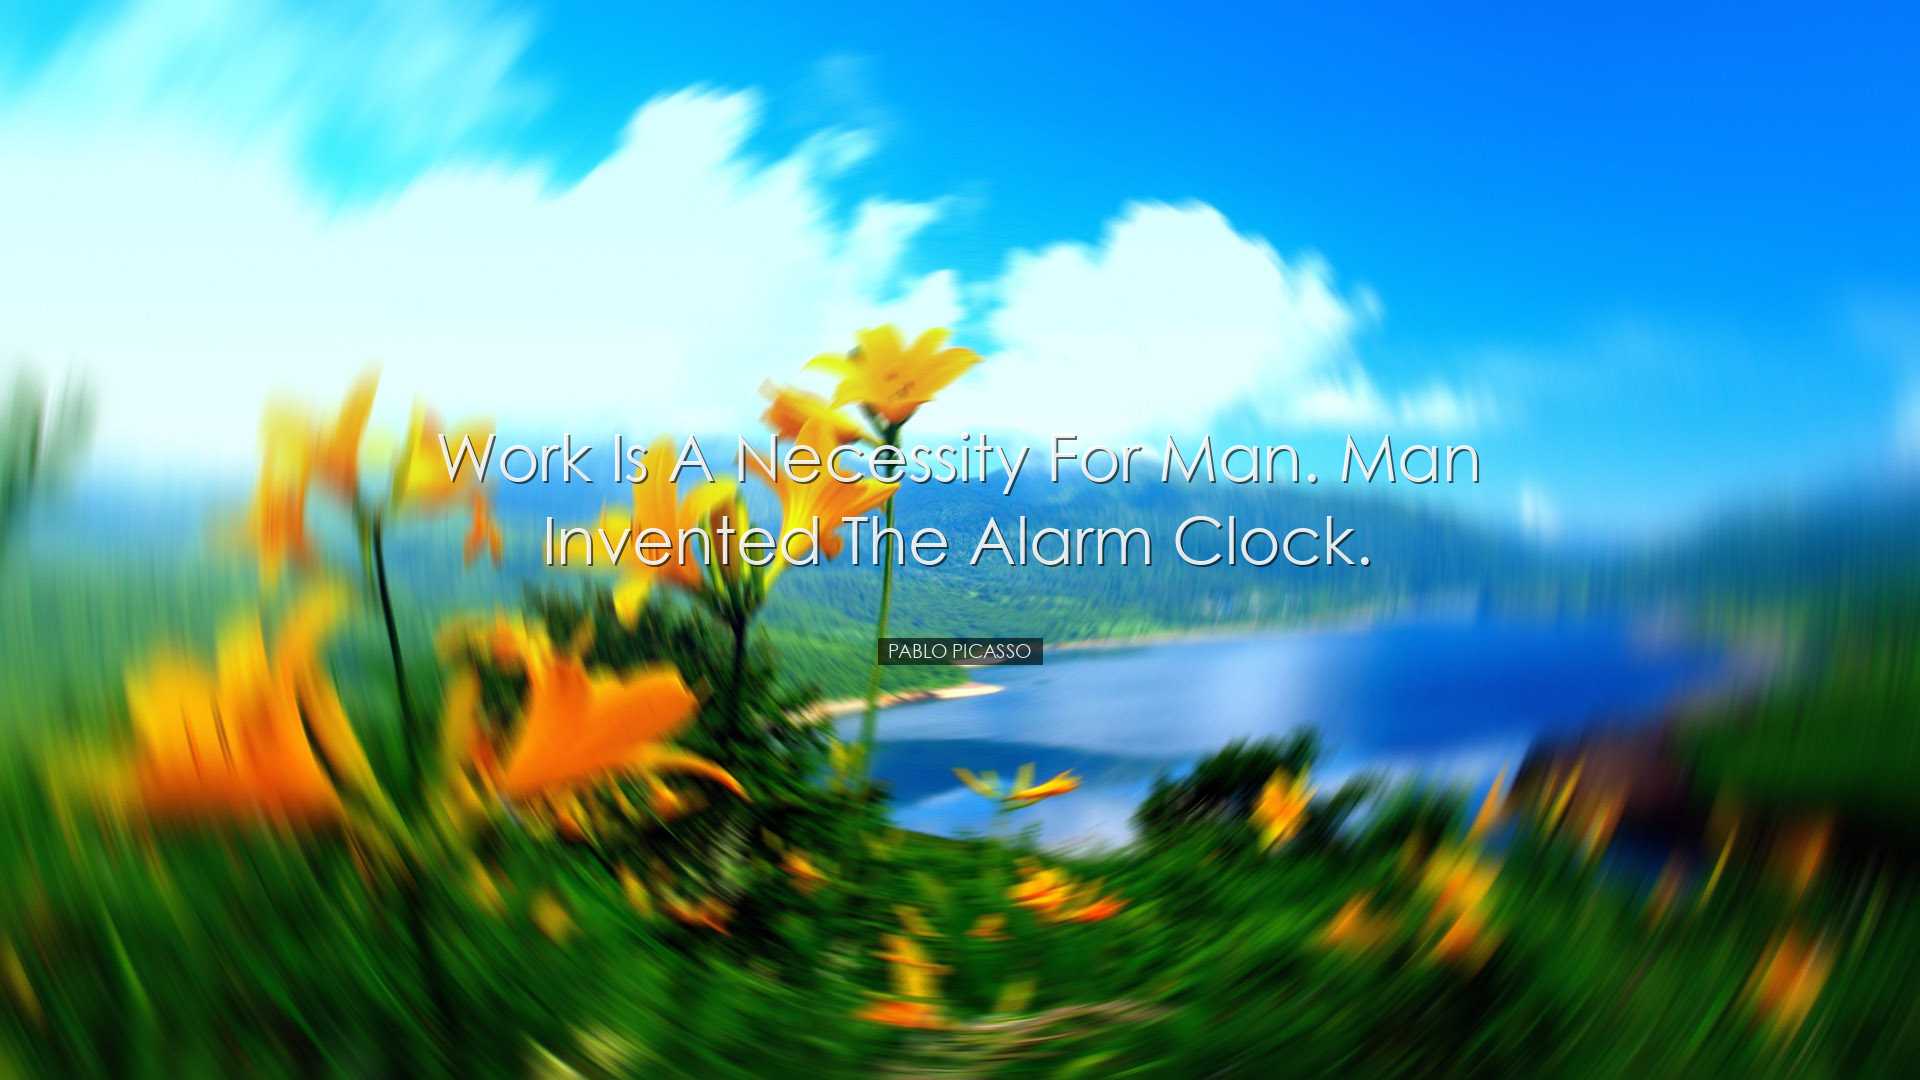 Work is a necessity for man. Man invented the alarm clock. - Pablo